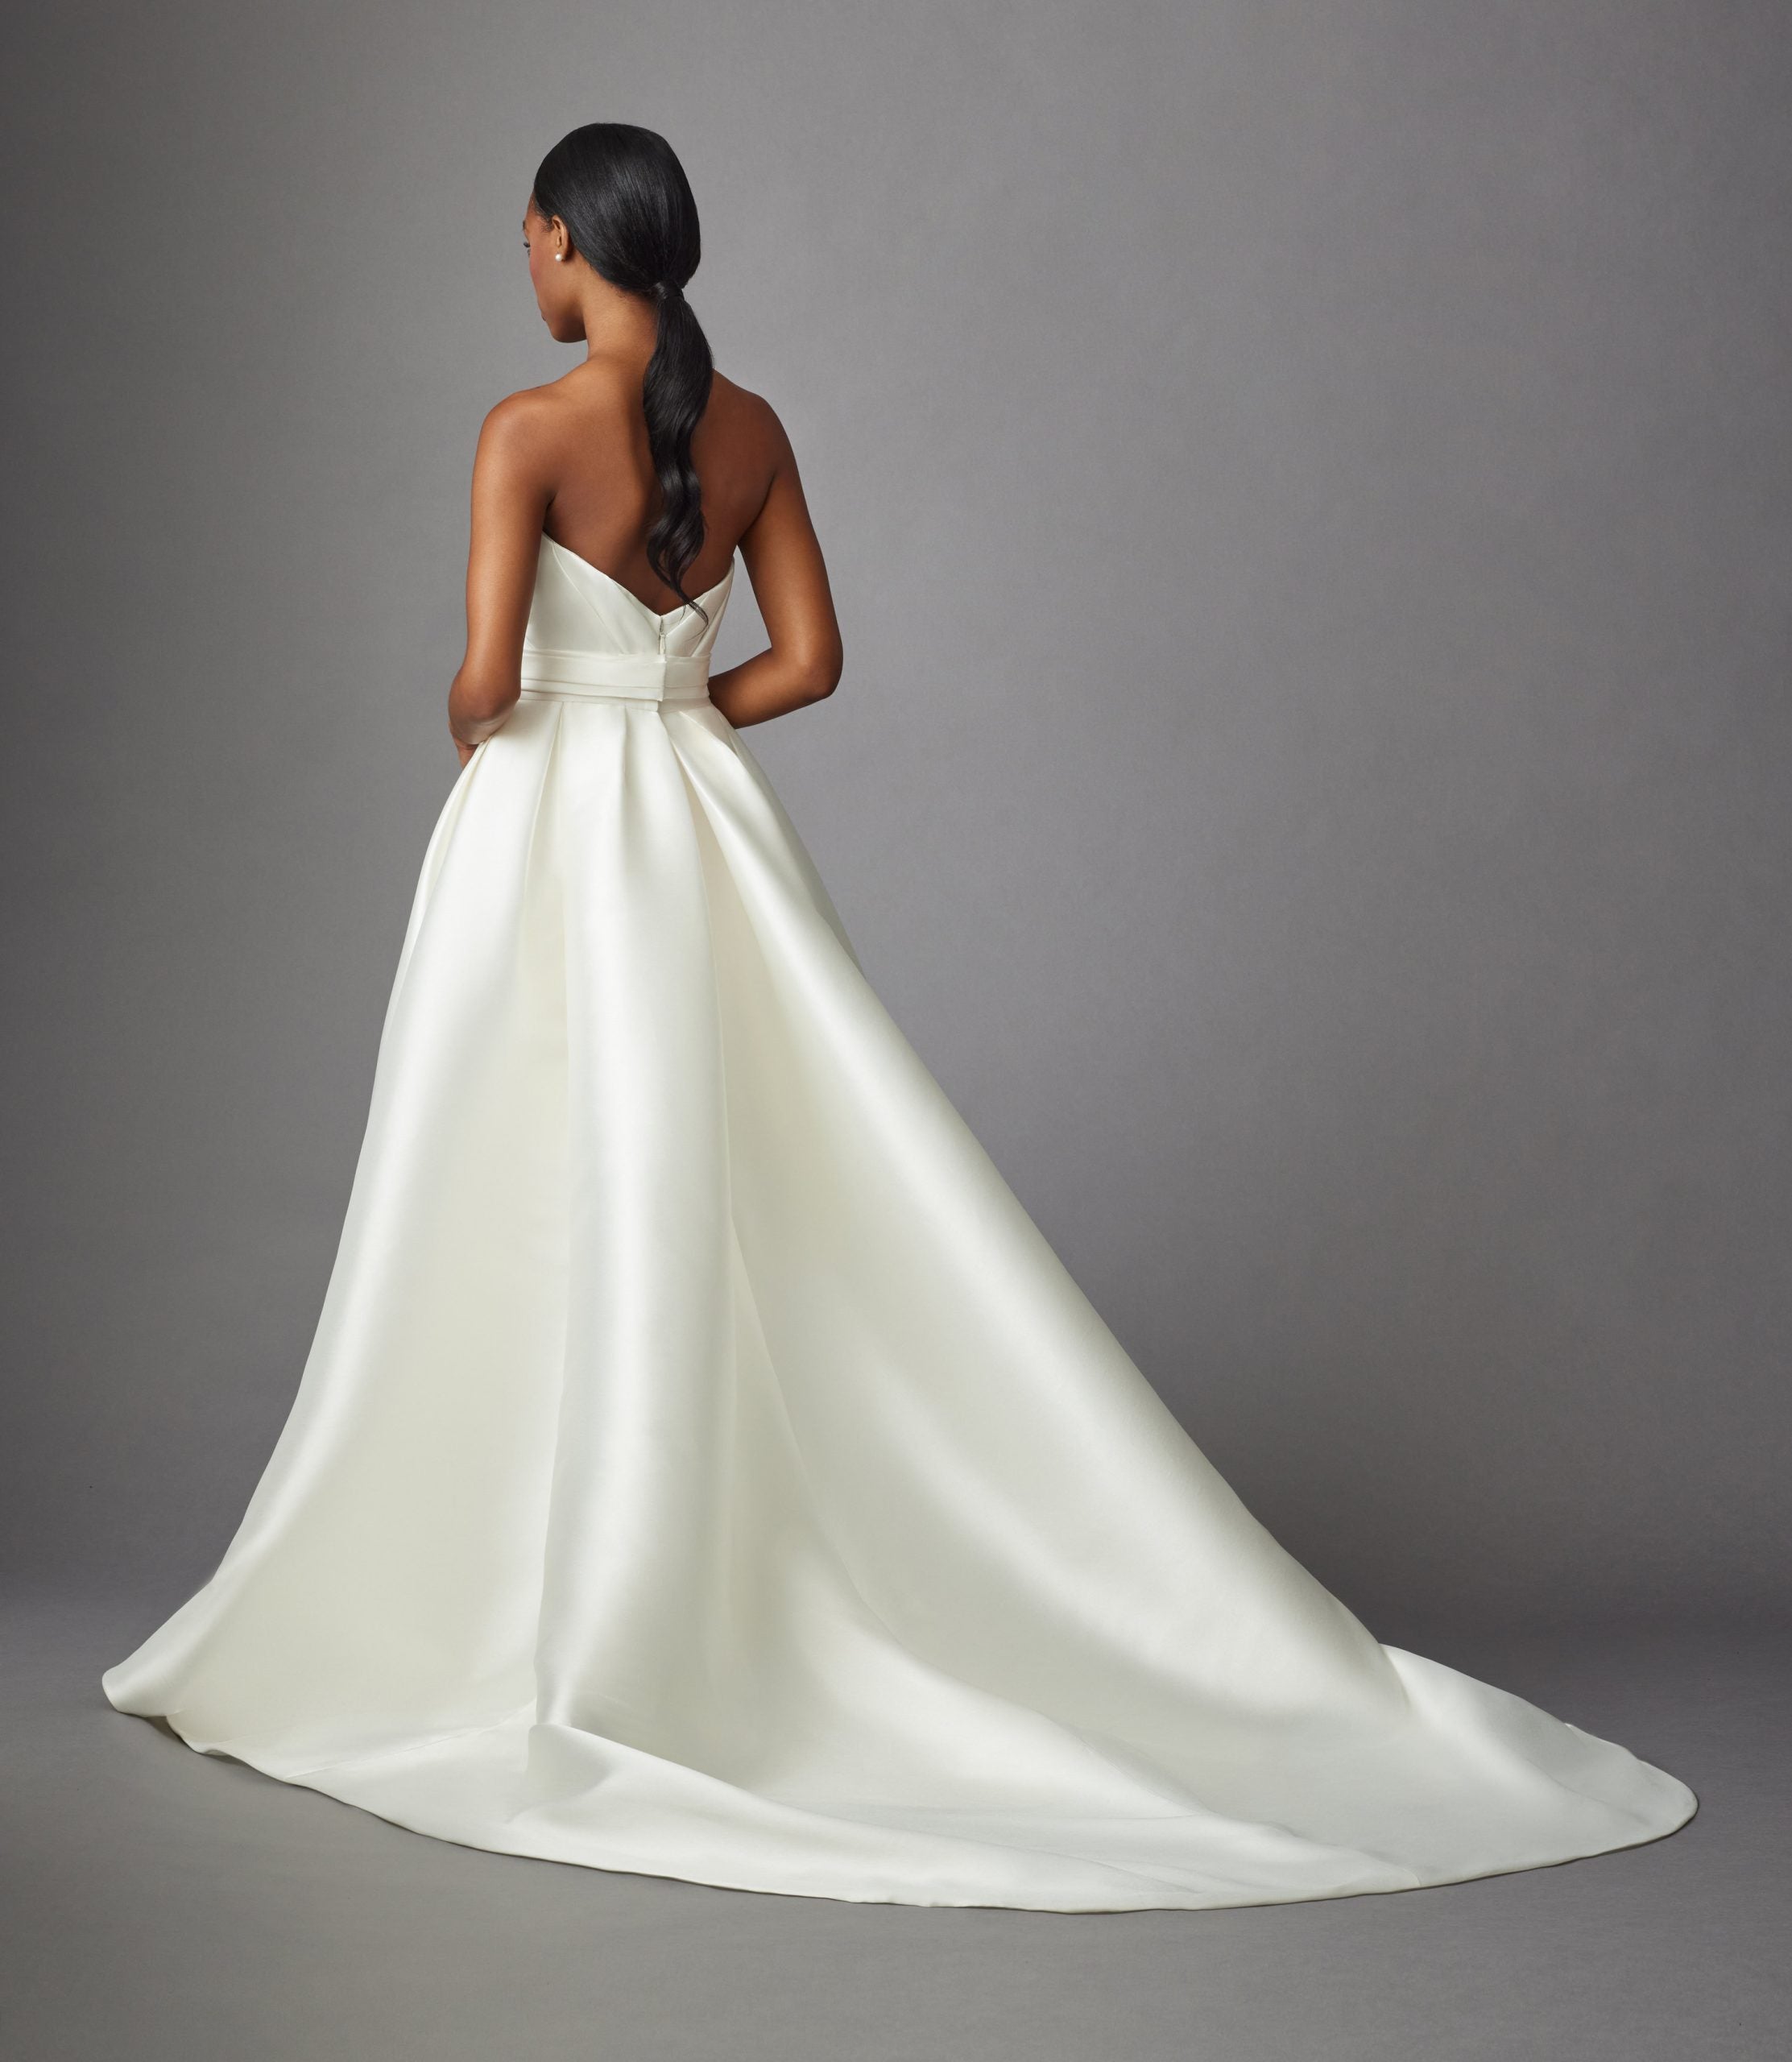 Strapless Fit And Flare Wedding Dress With Detachable Overskirt by Allison Webb - Image 2